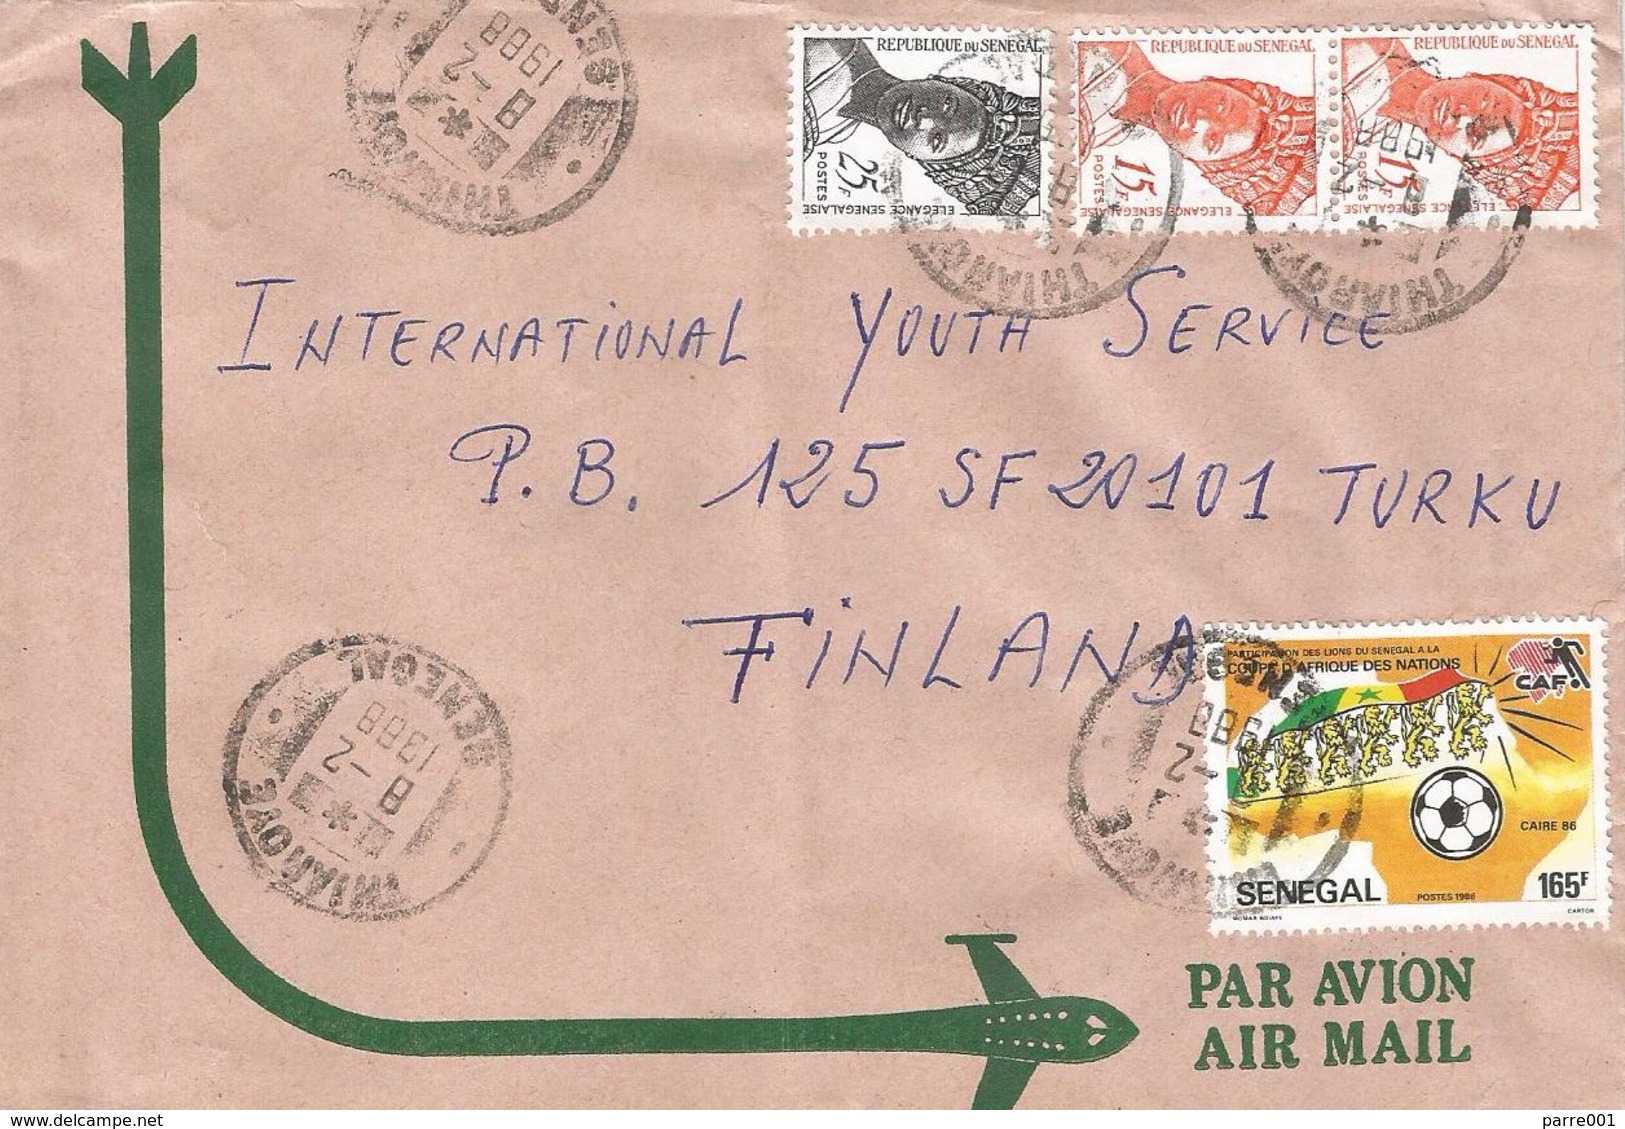 Senegal 1988 Thiaroye African Nations Cup Cairo Football Soccer 165f Cover - Africa Cup Of Nations